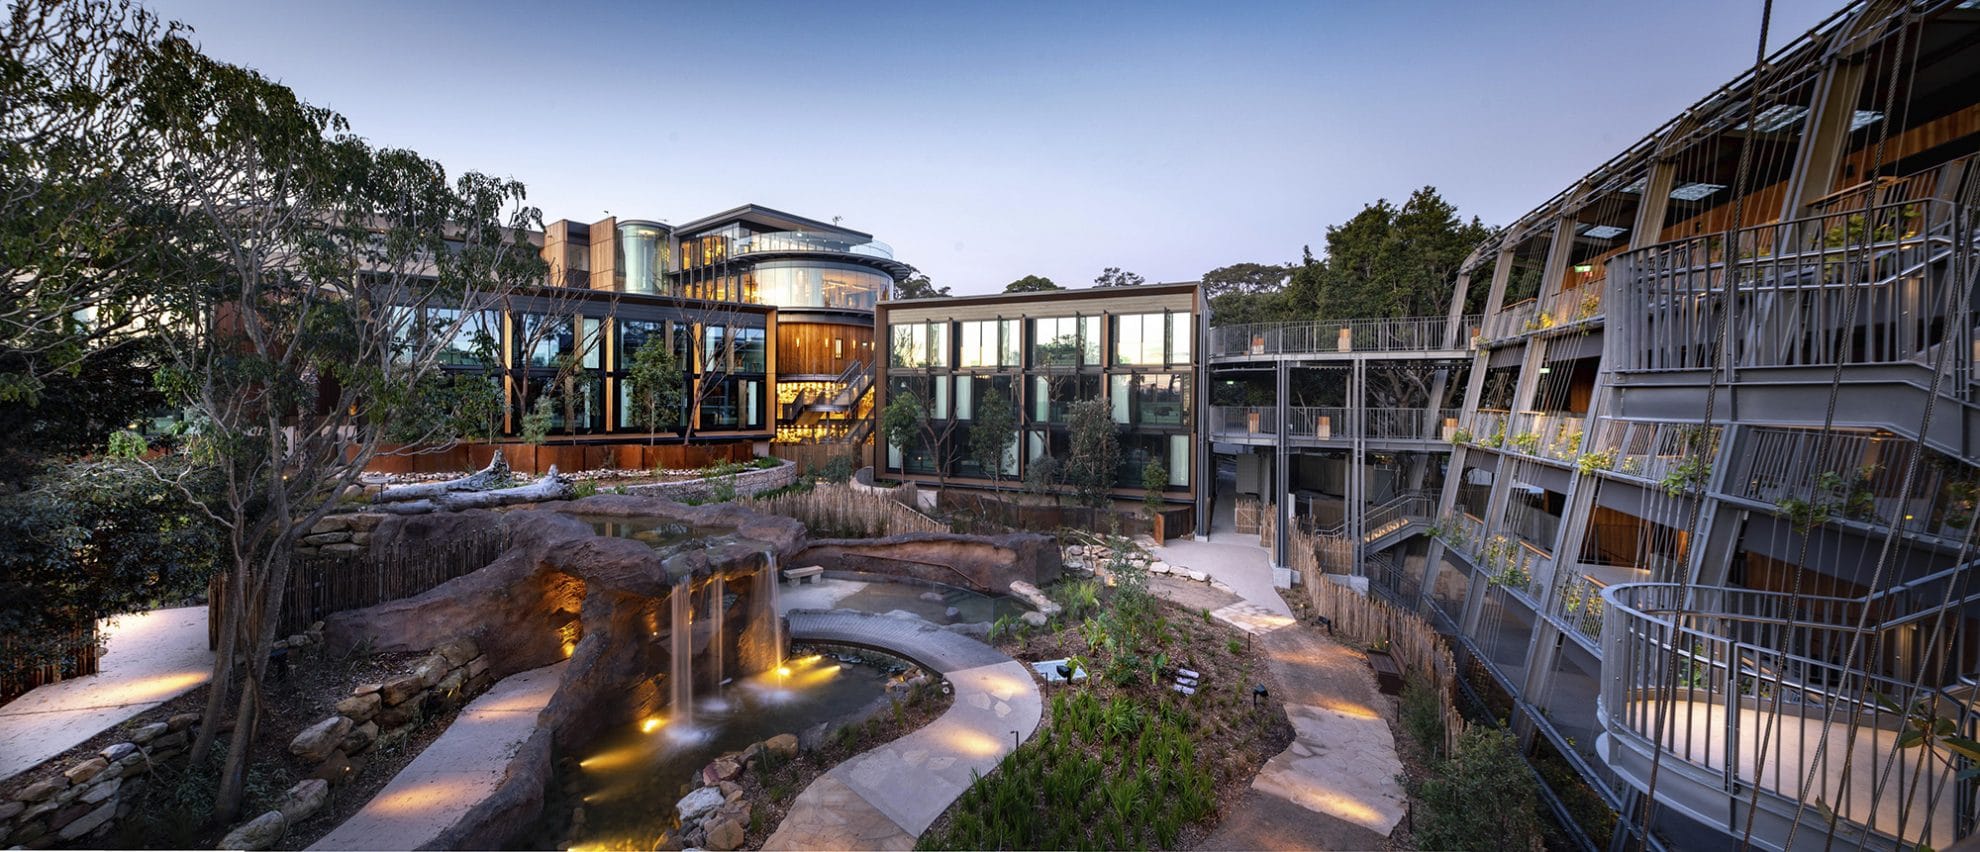 The Luxury Wildlife Retreat At Taronga Zoo Is A Surprising Delight Just Minutes From The CBD